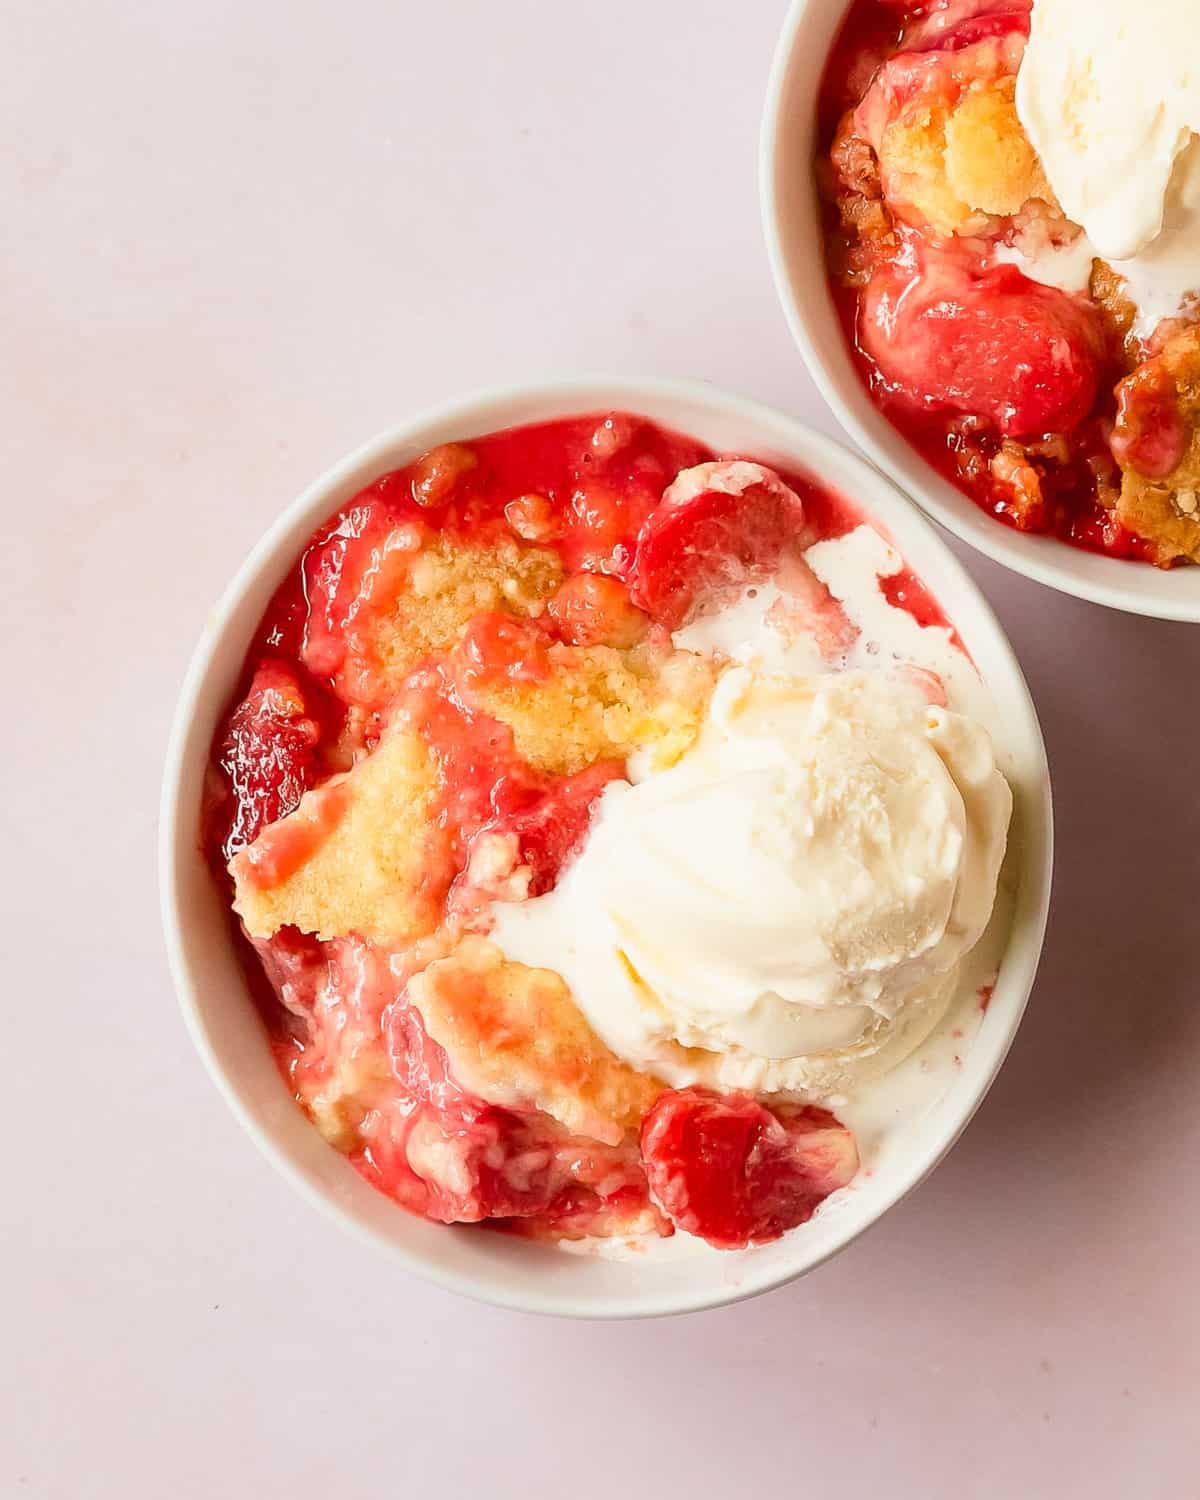 Rhubarb dump cake is a refreshingly delicious baked fruit dessert made from tart rhubarb, sweet strawberry jello, white or yellow cake mix and butter. Make this rhubarb cake mix cobbler for the perfect quick and easy spring or summer dessert.